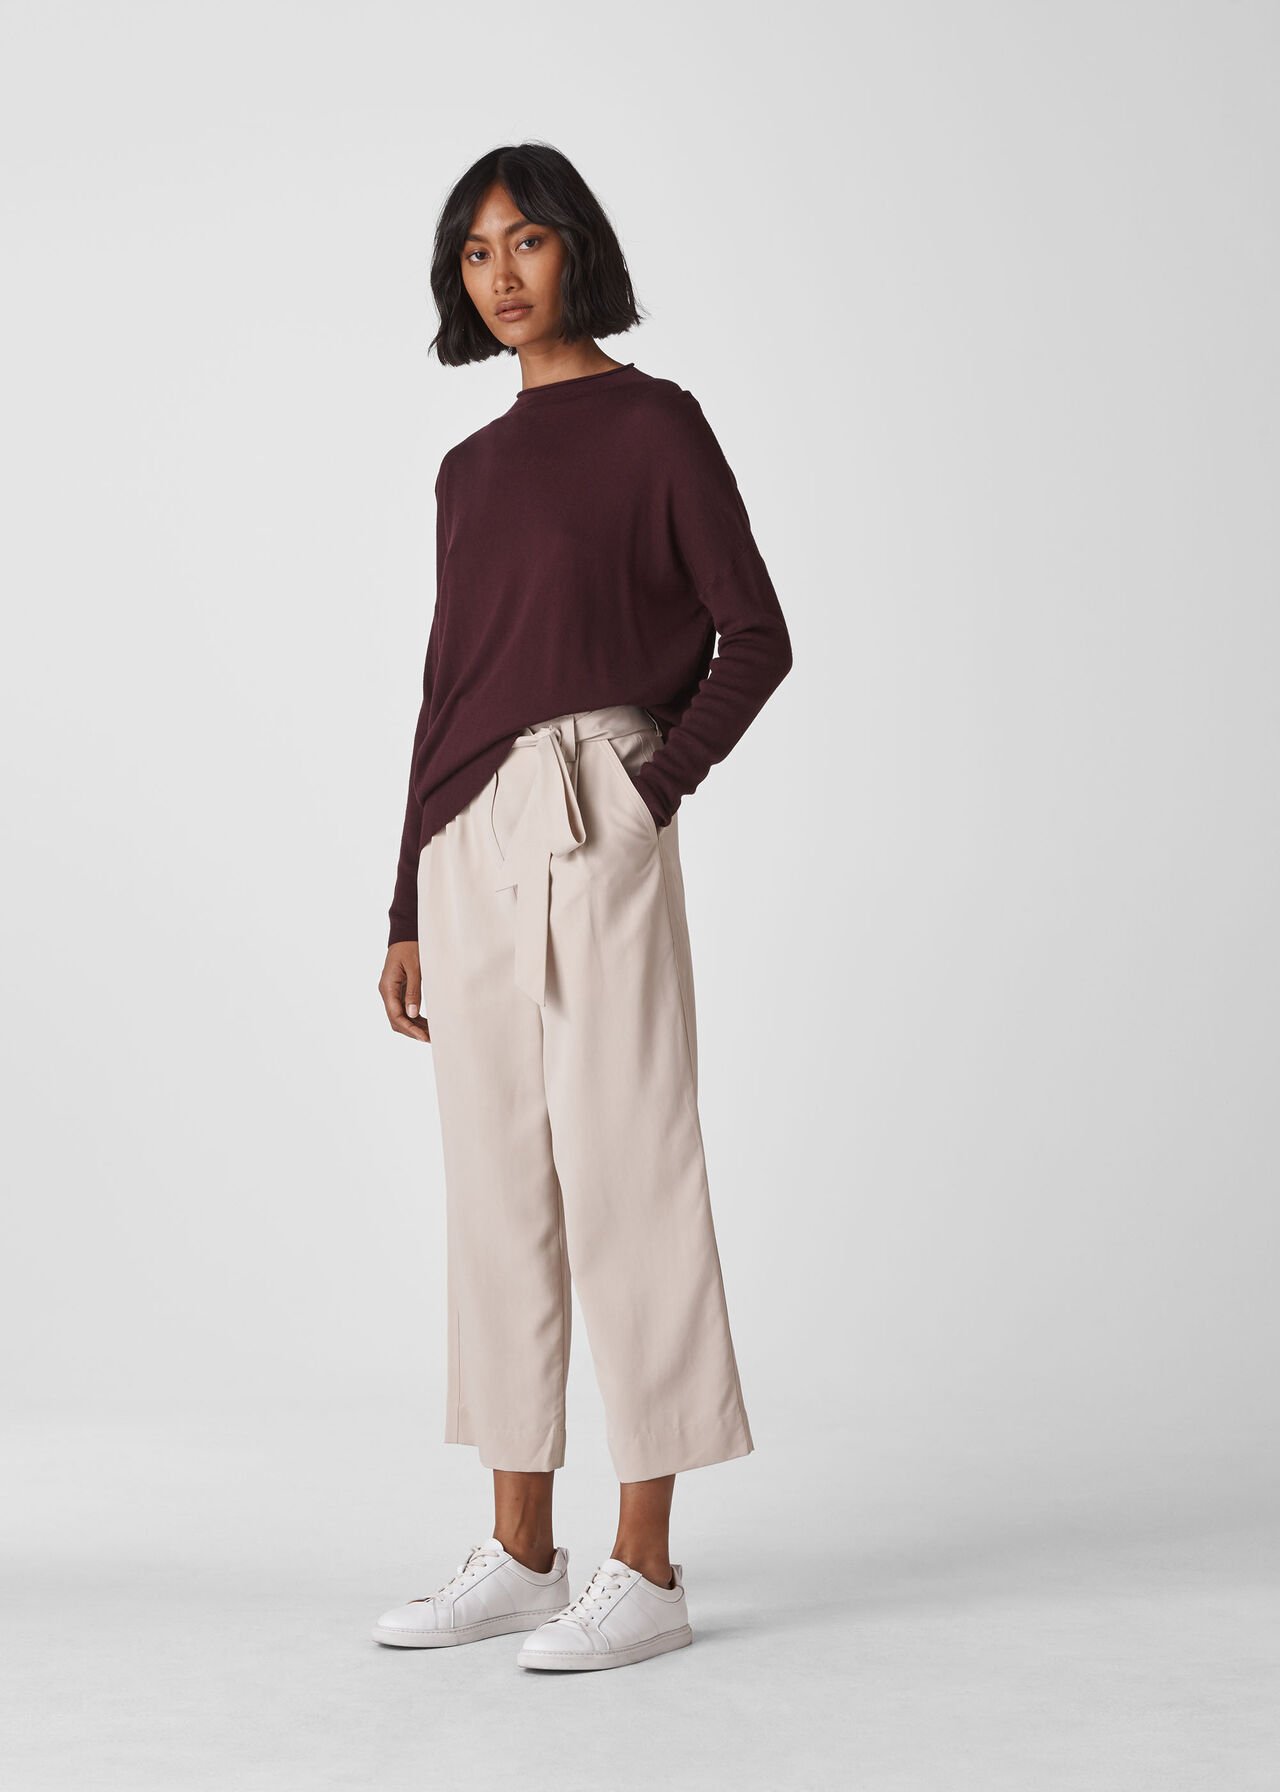 Relaxed Grown On Neck Knit Burgundy